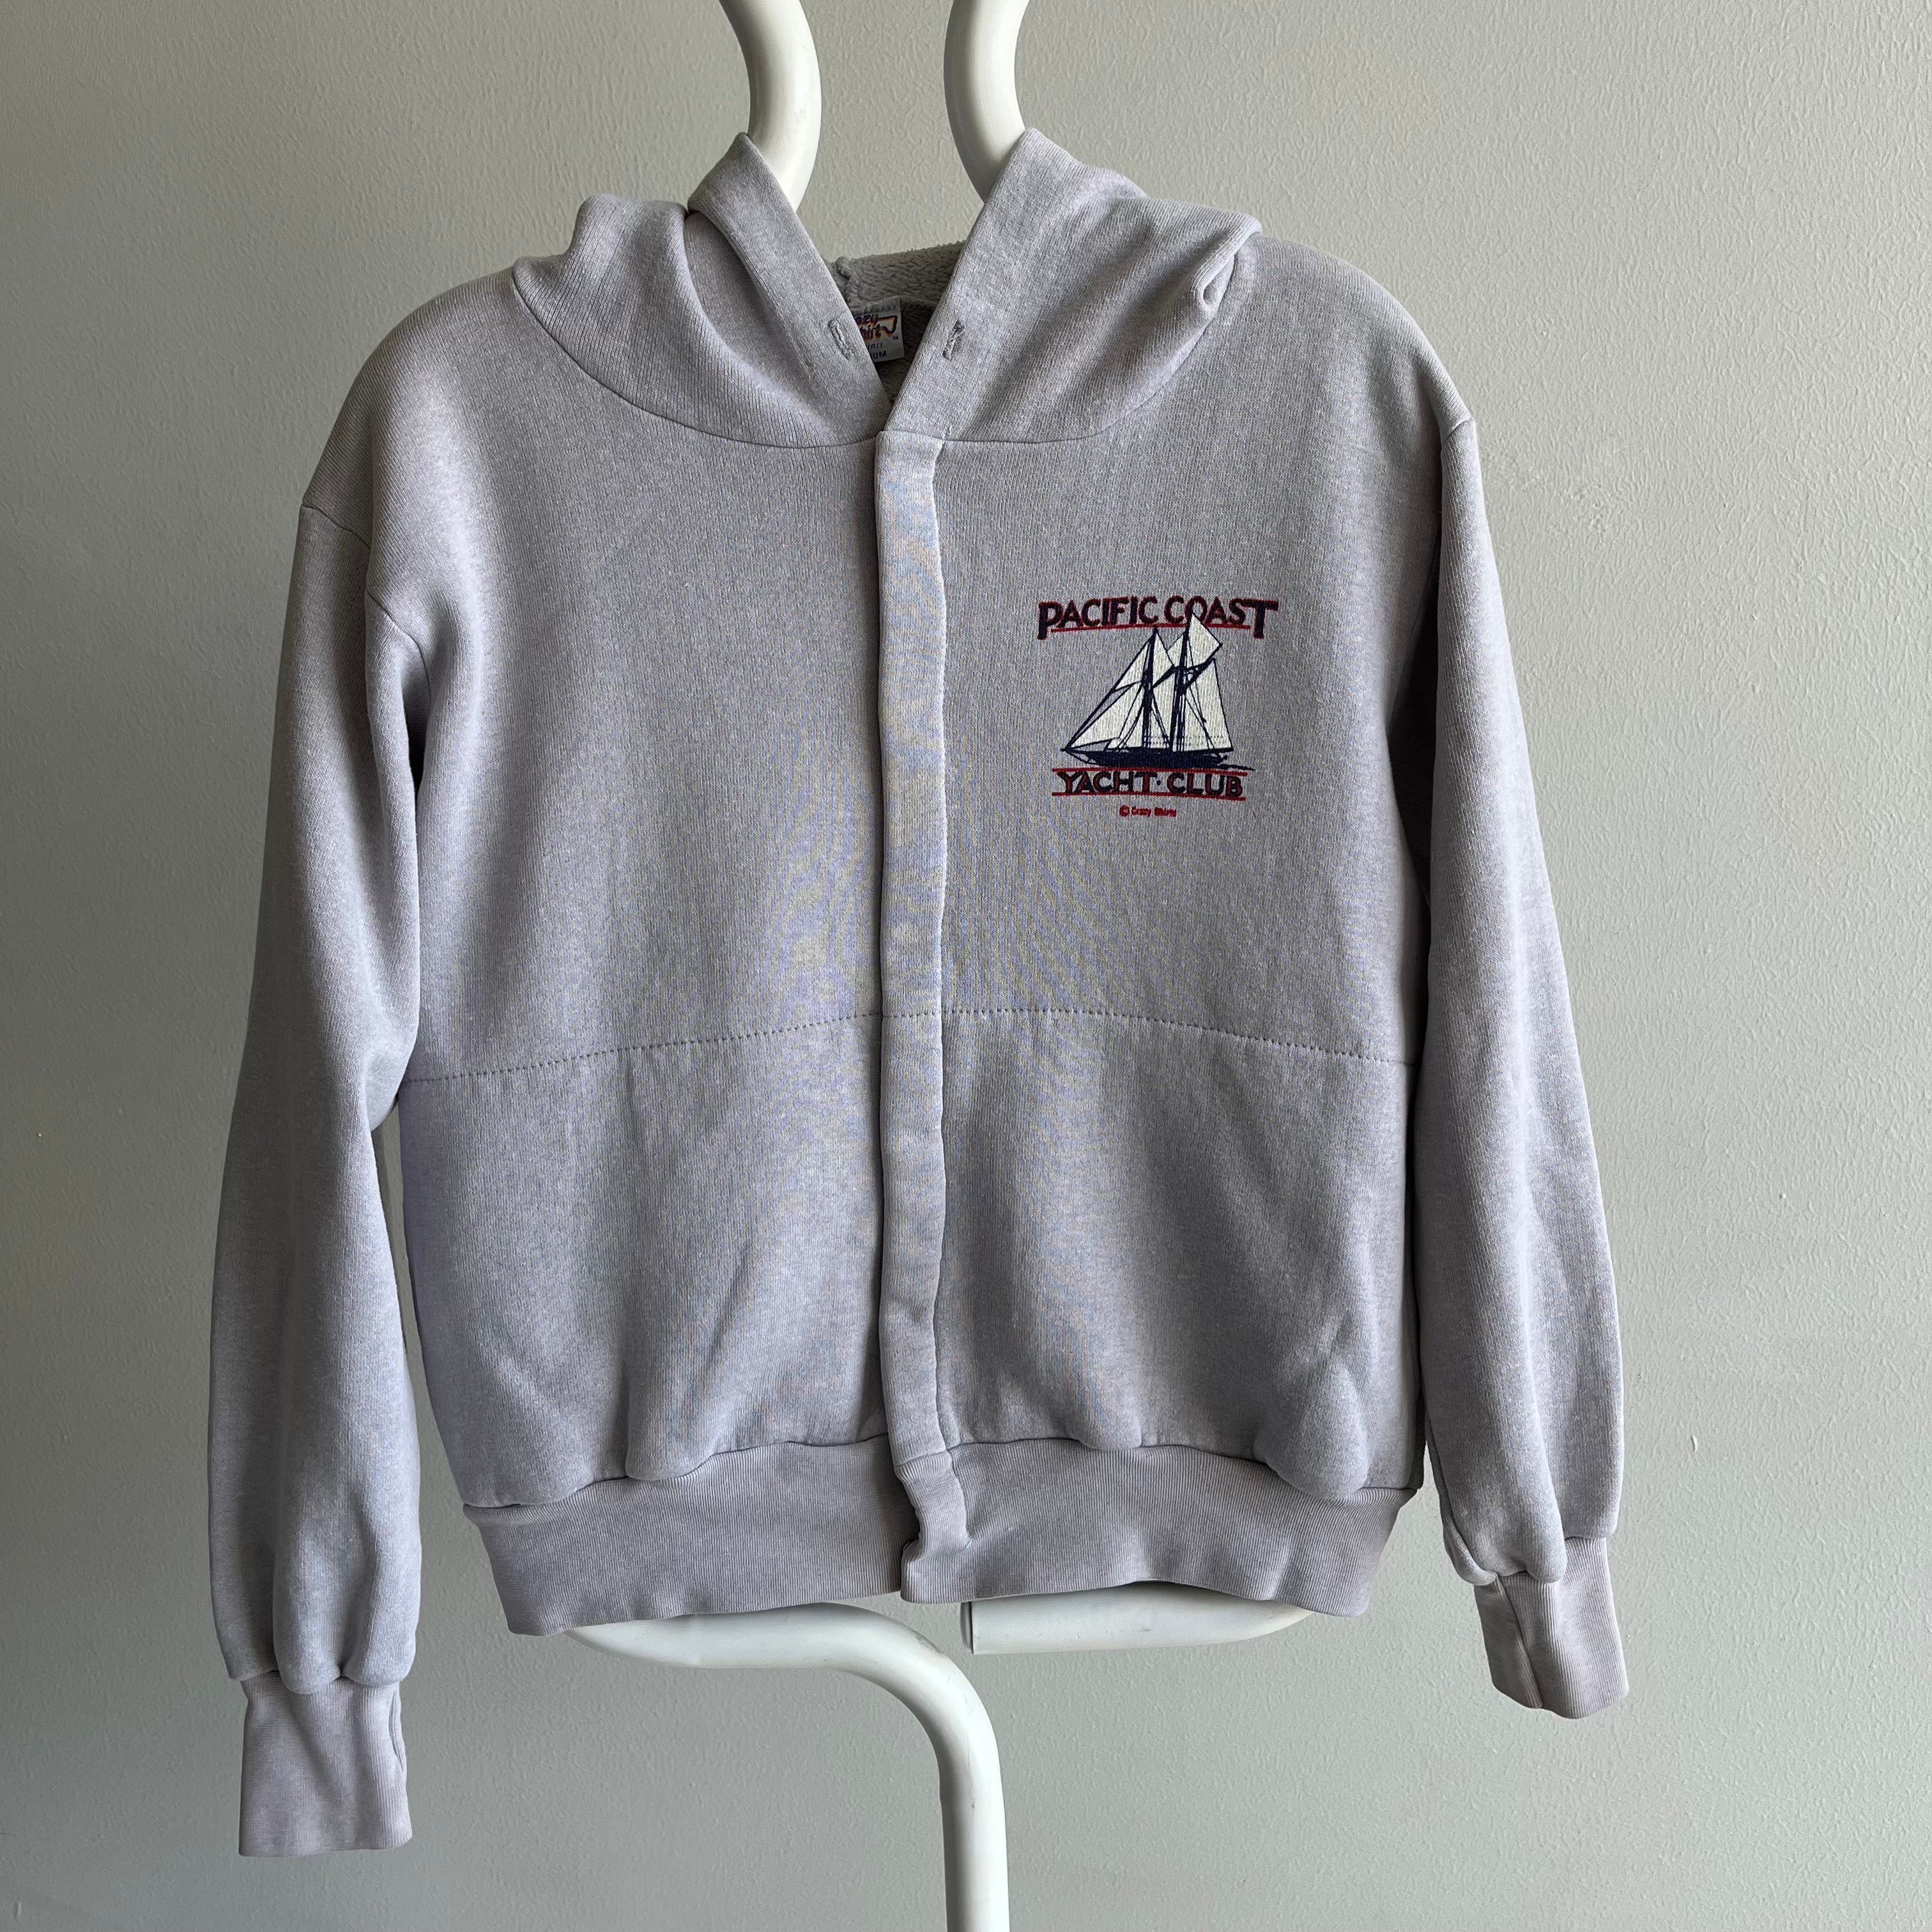 1980s San Francisco Pacific Coast Yacht Club Snap Hoodie by Crazy Shirts - OH MY!!!